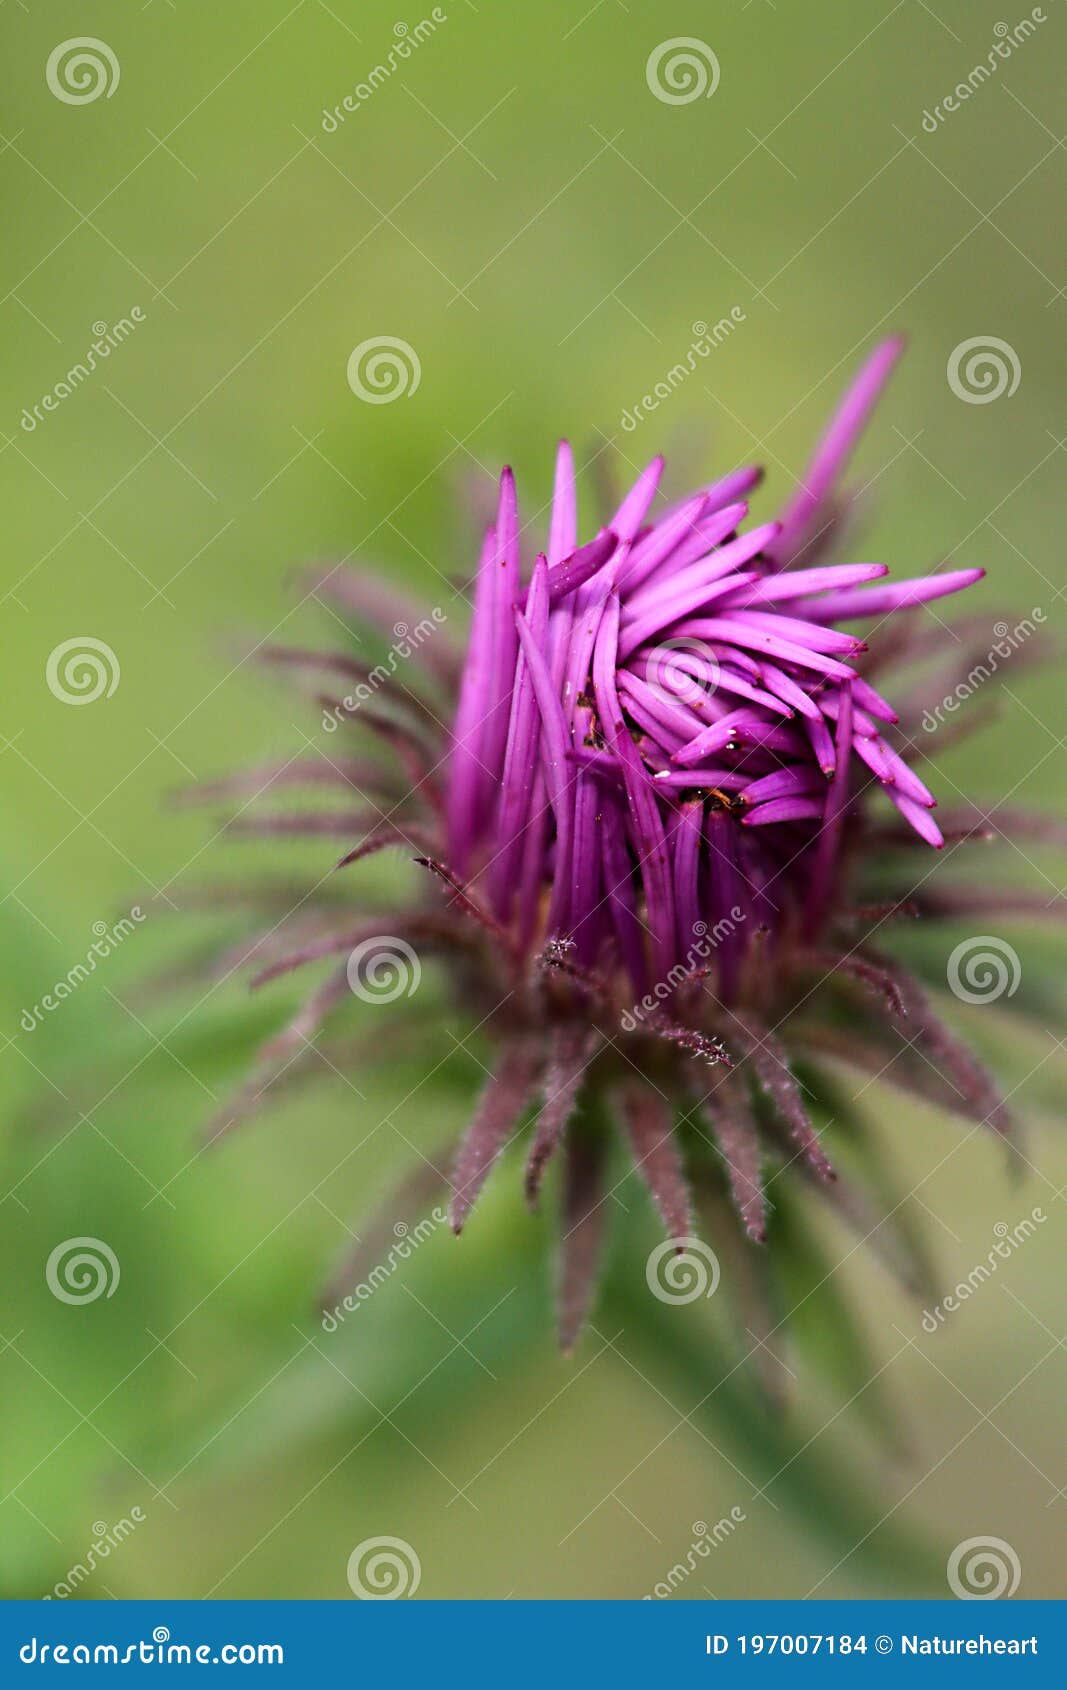 unfurling purple aster bud close up with soft green background - vertical